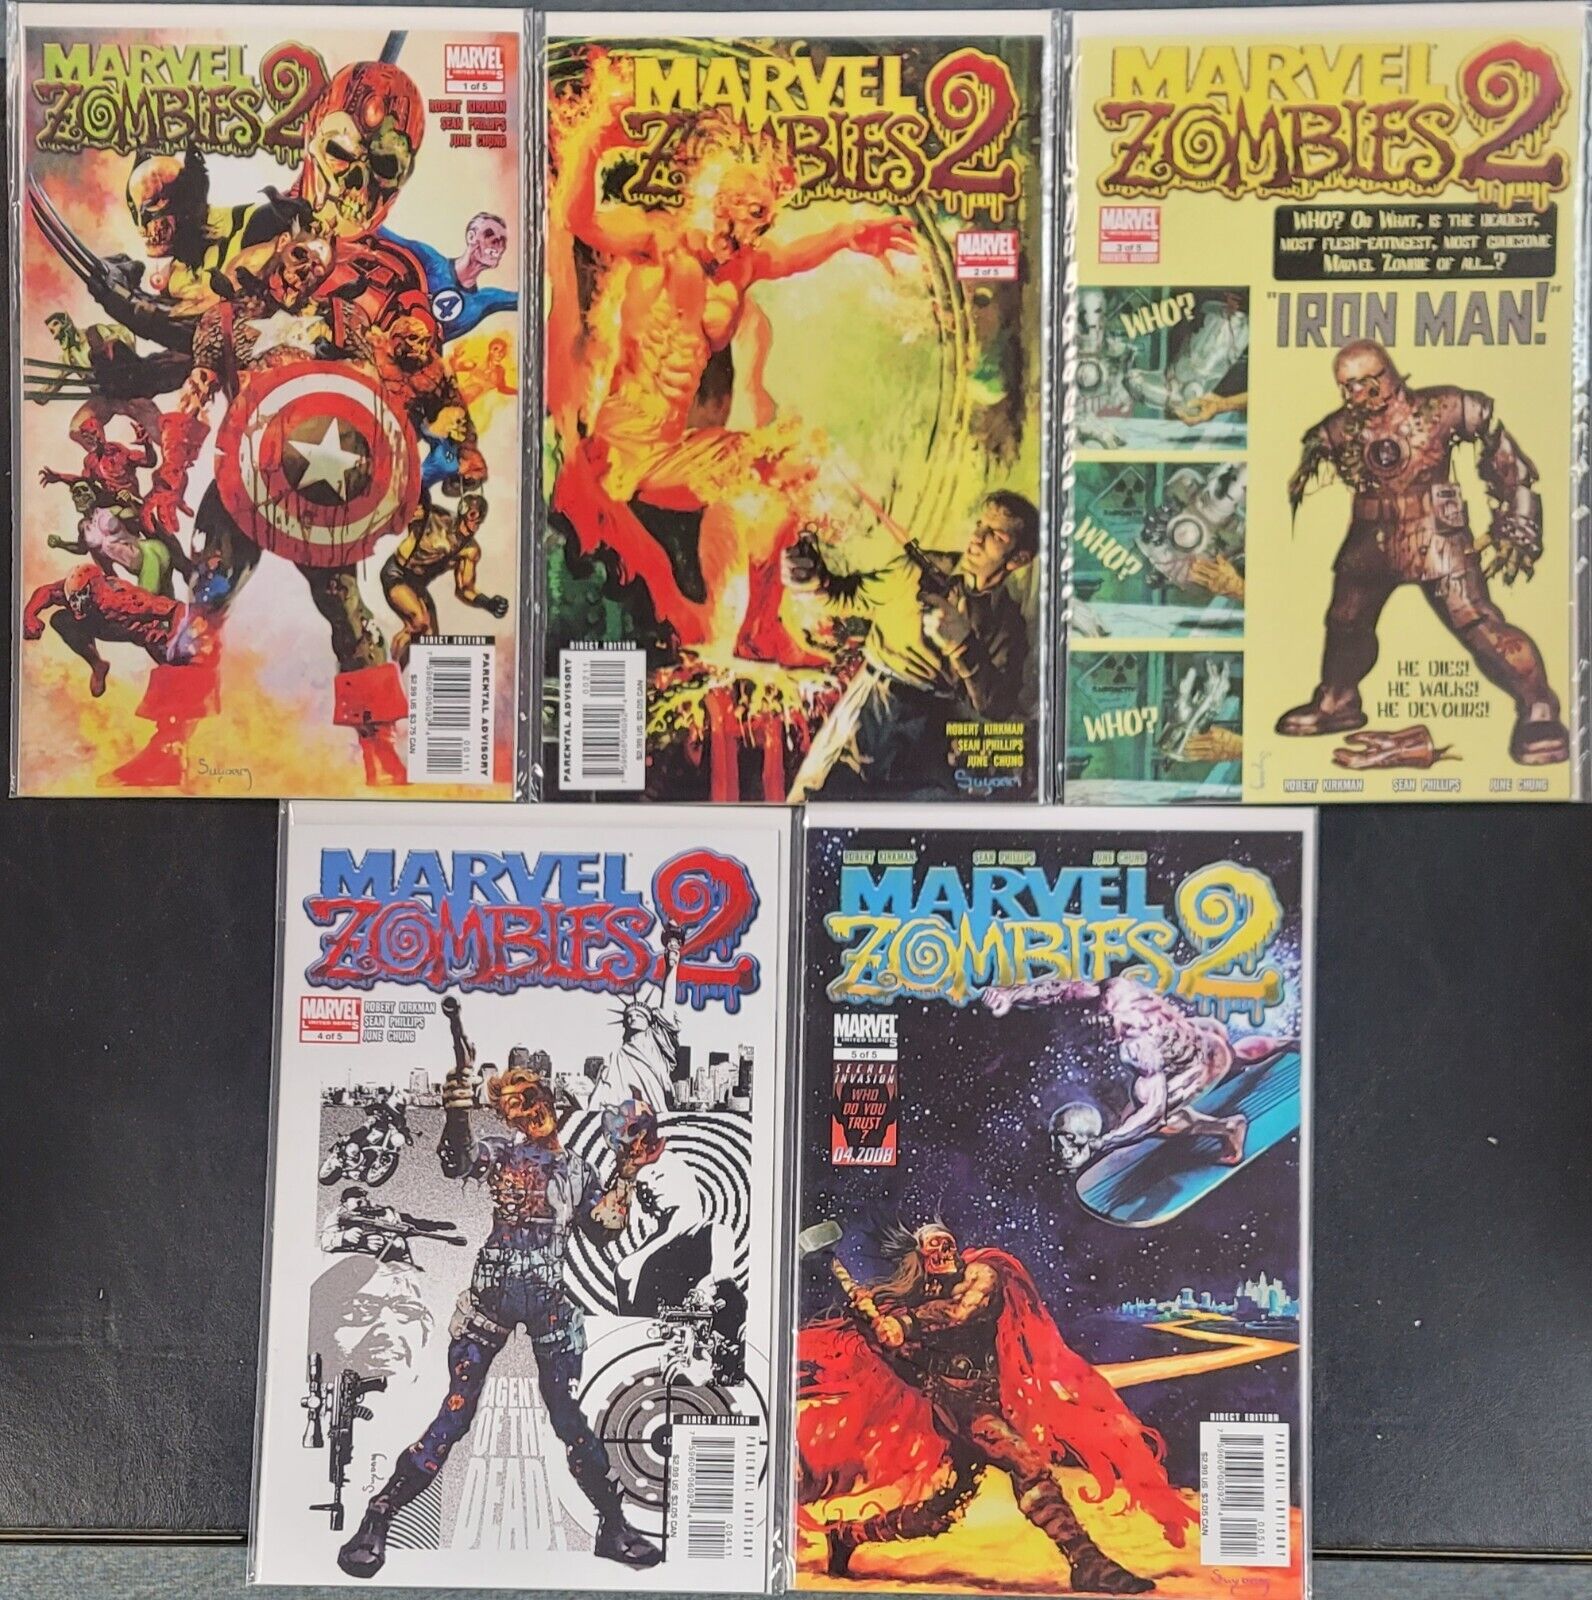 Marvel Zombies 2 #1-5 Marvel Comics 2007 Complete Set VF-NM 8.0-9.0 or Better